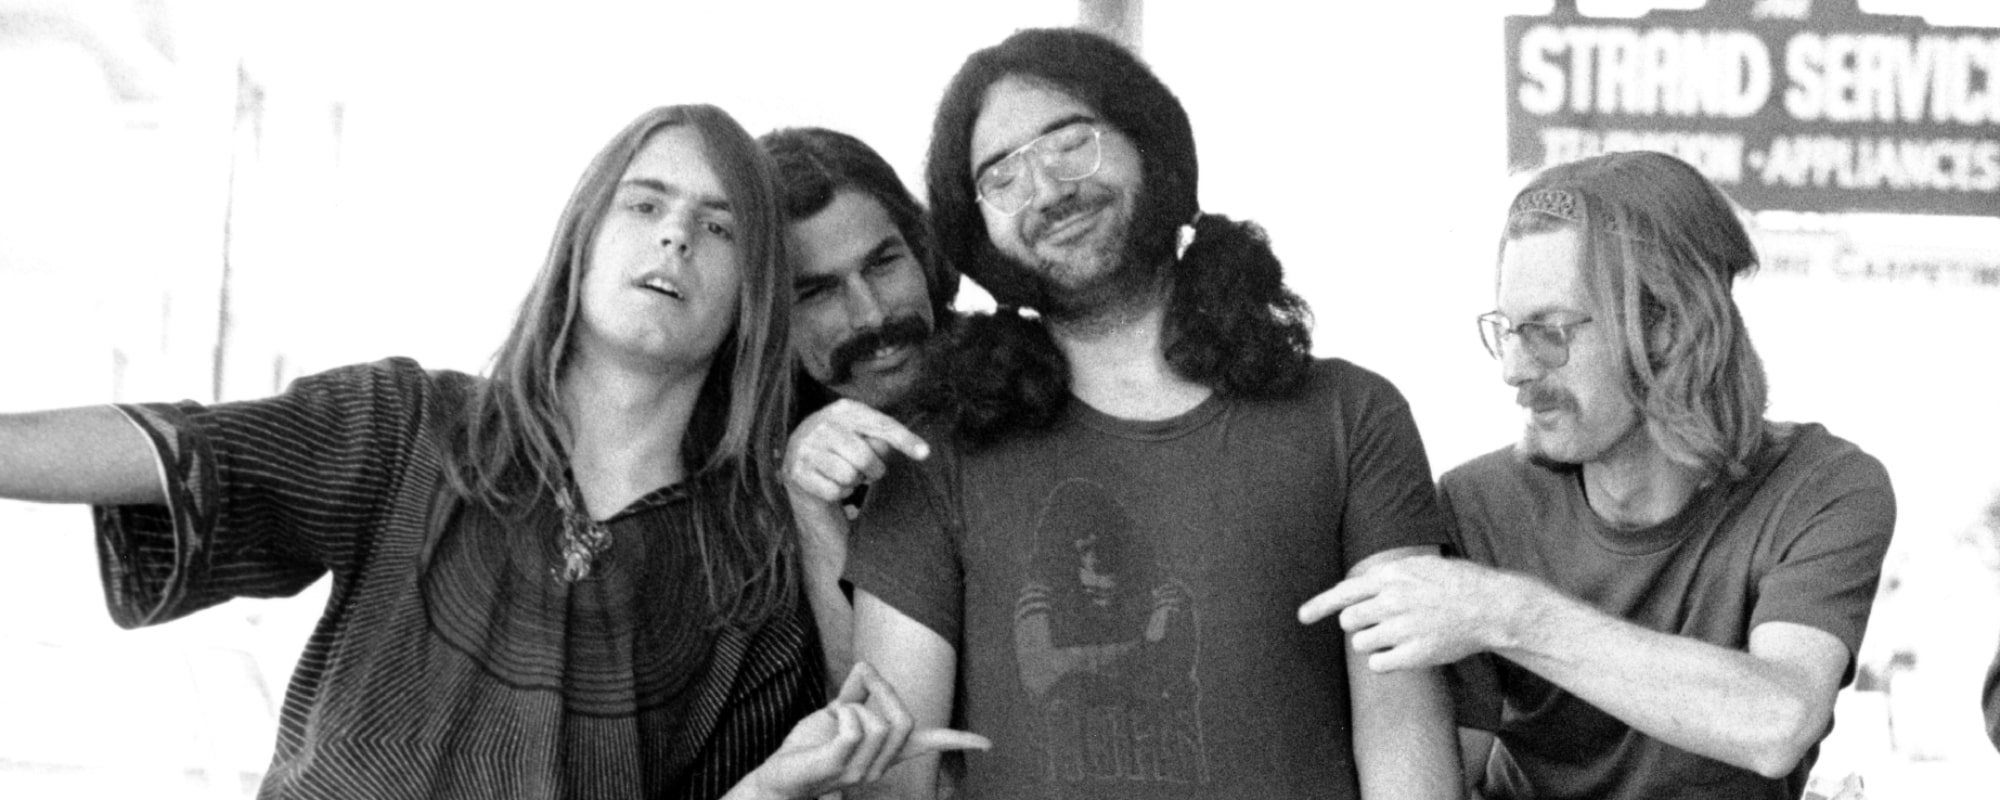 The Grateful Dead Release ‘From the Mars Hotel: The Angel’s Share’ with Outtakes, Alternates of Classic Tracks, & More